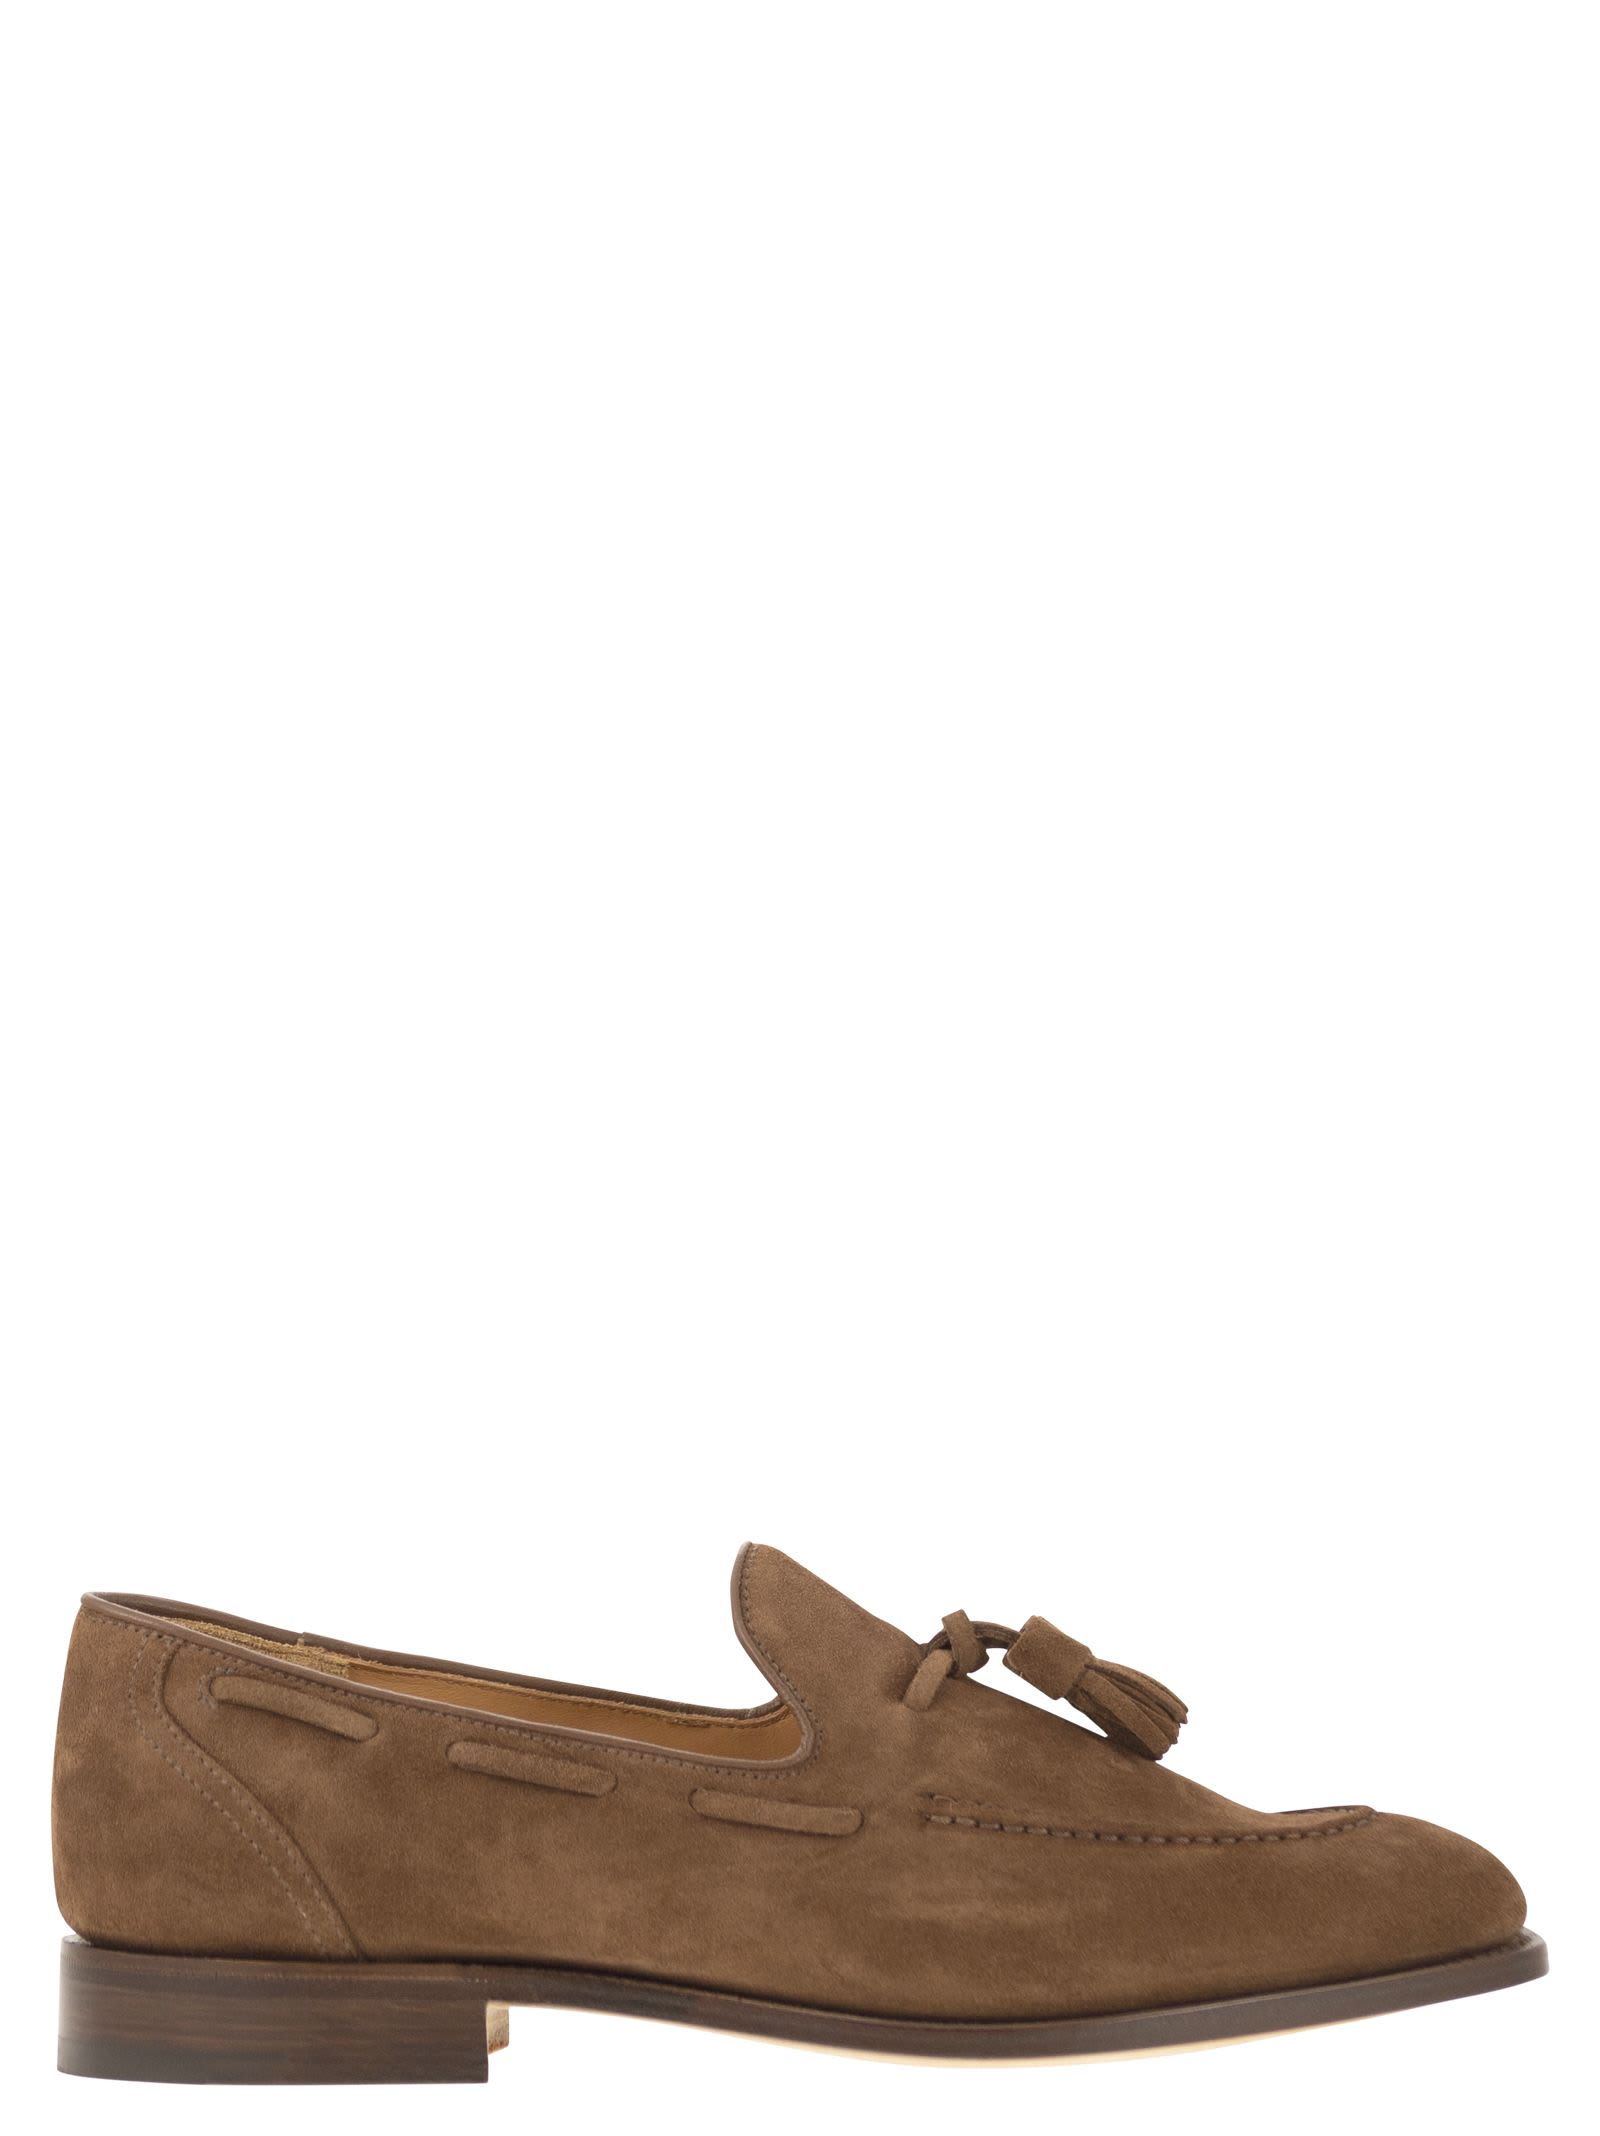 Soft Suede Moccasin